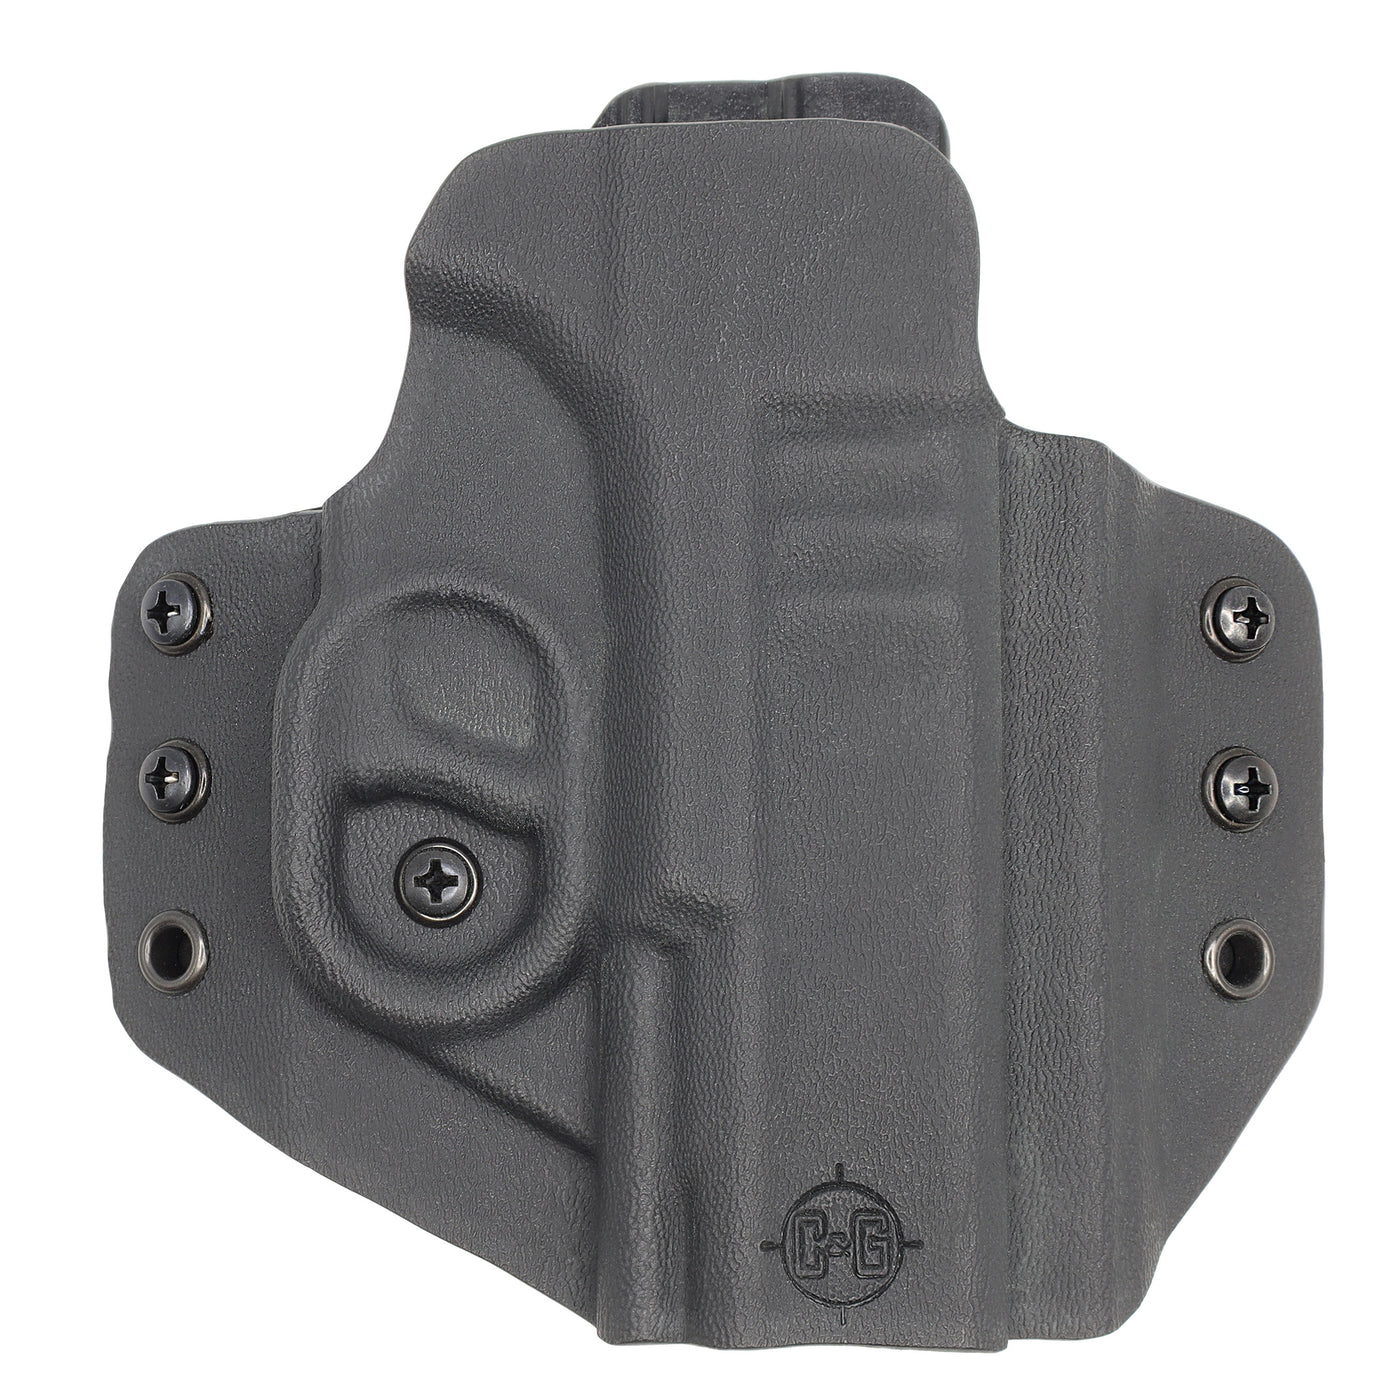 C&G Holsters Quickship OWB Covert Shadow Systems MR920